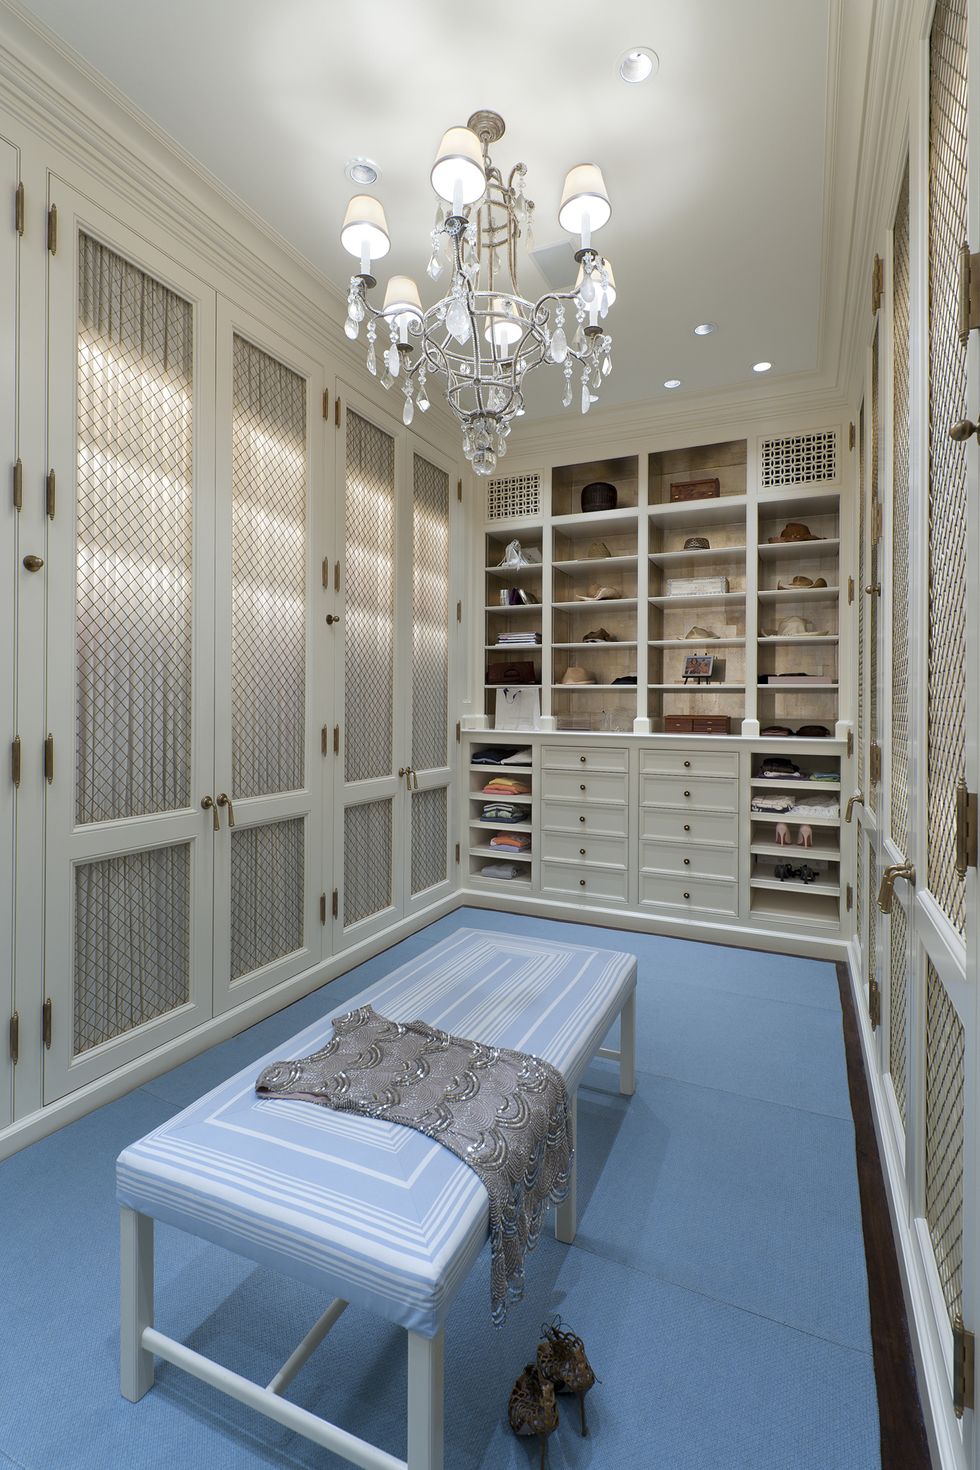 12 Walk-In Closet Inspirations To Give Your Bedroom A Trendy Makeover